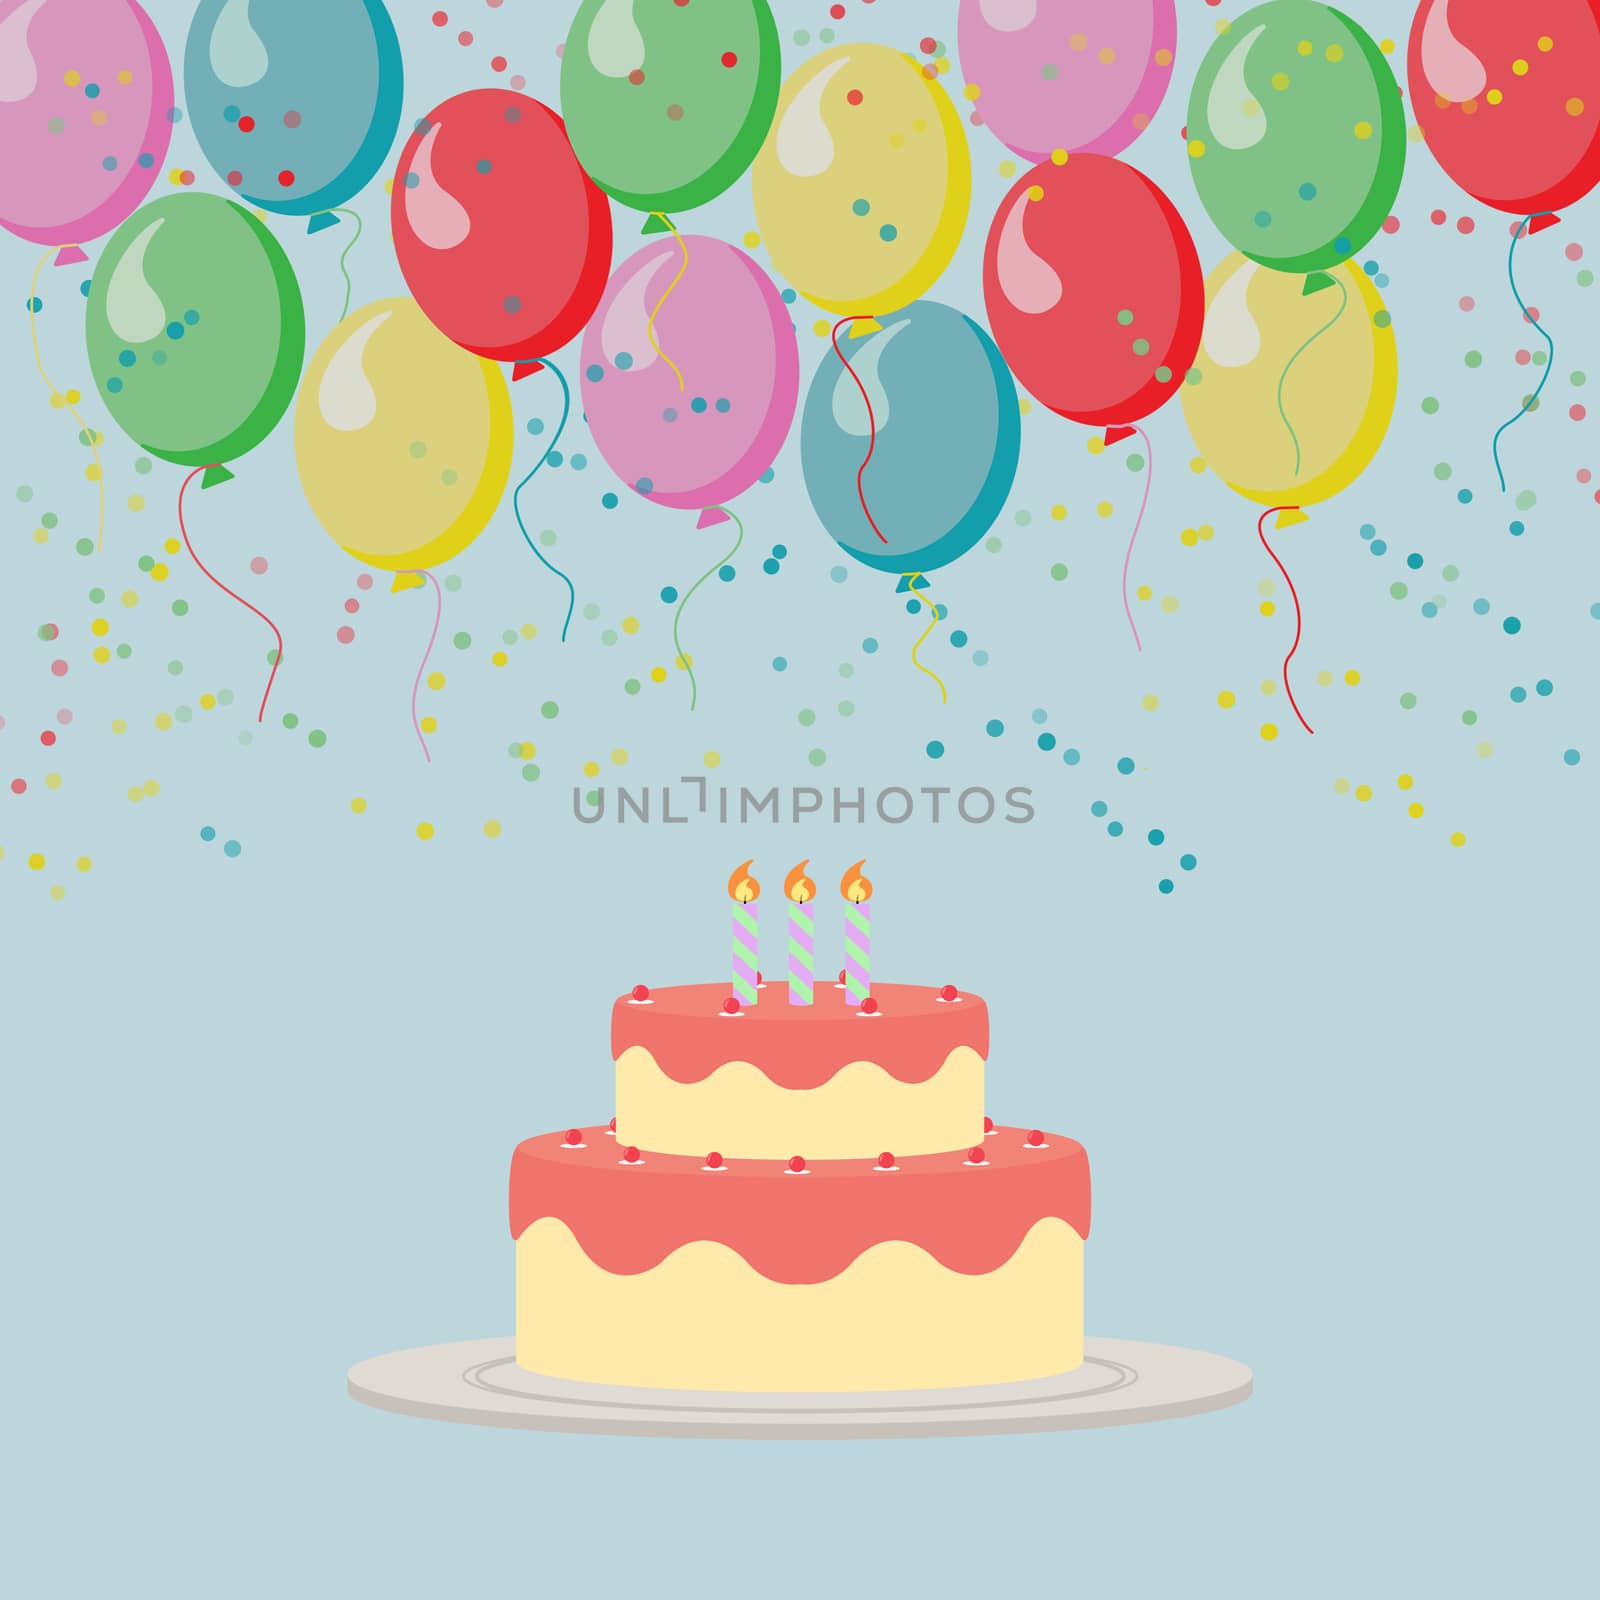 Illustrated pattern with cake and balloons  by Grommik